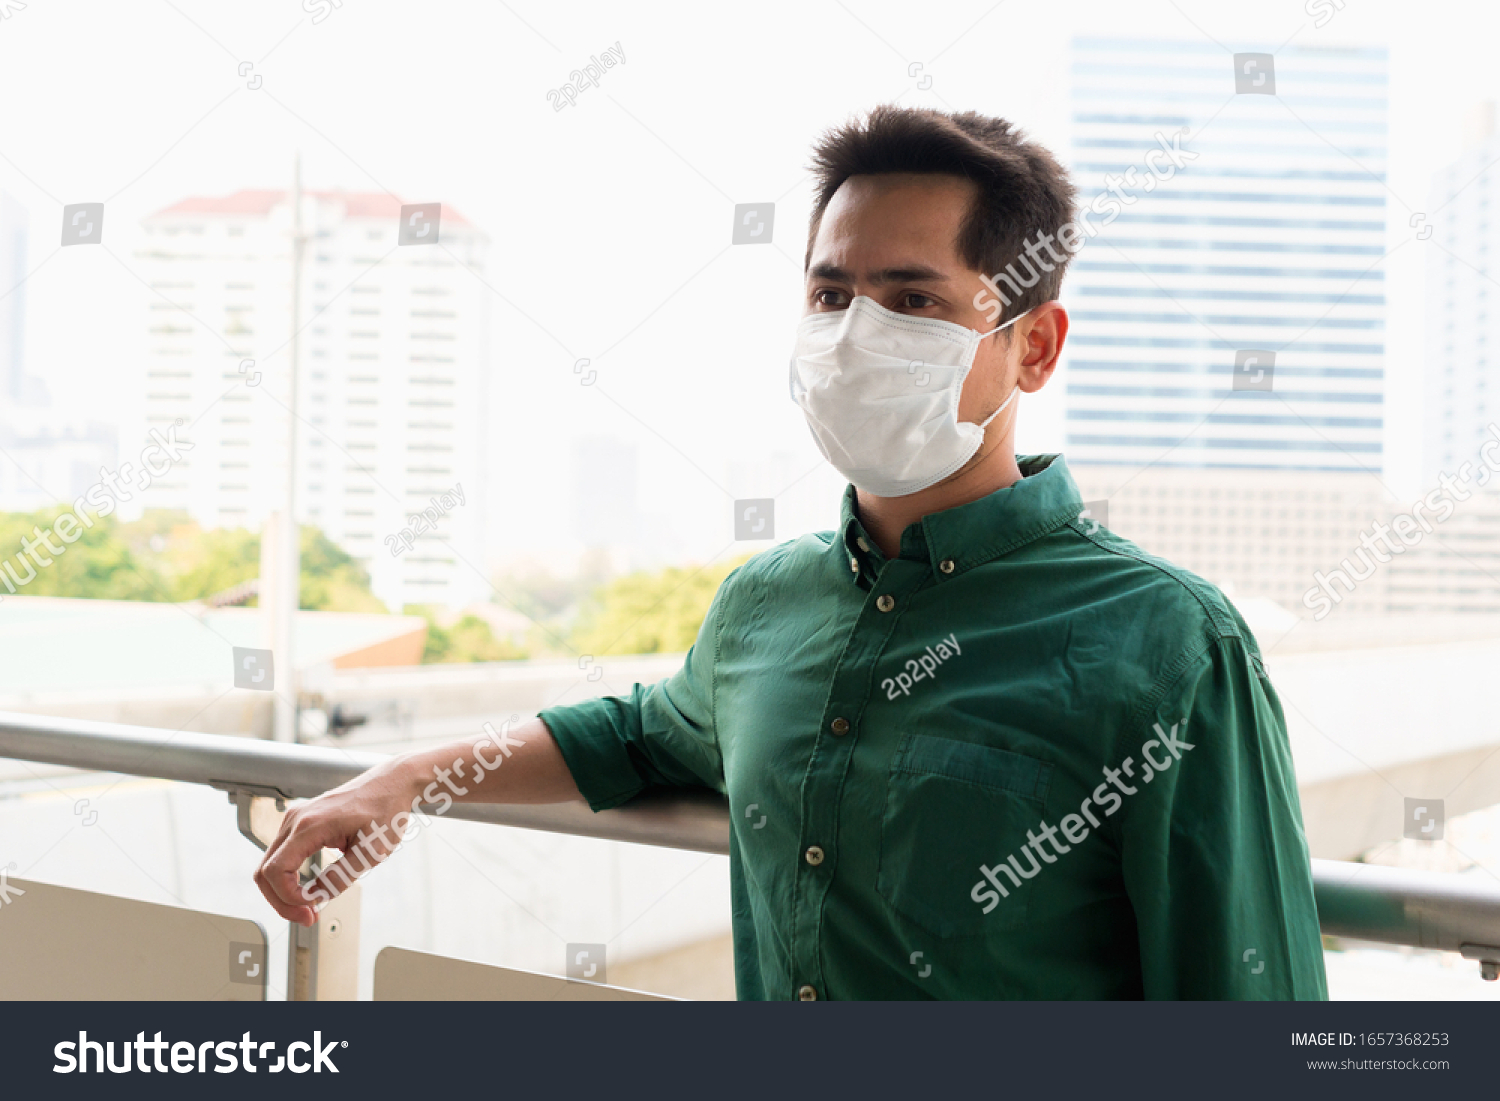 A man wearing mask protective for spreading of disease virus Covid-19 and  air smog pollution with PM 2.5 in Bangkok city, Thailand 2020. #1657368253